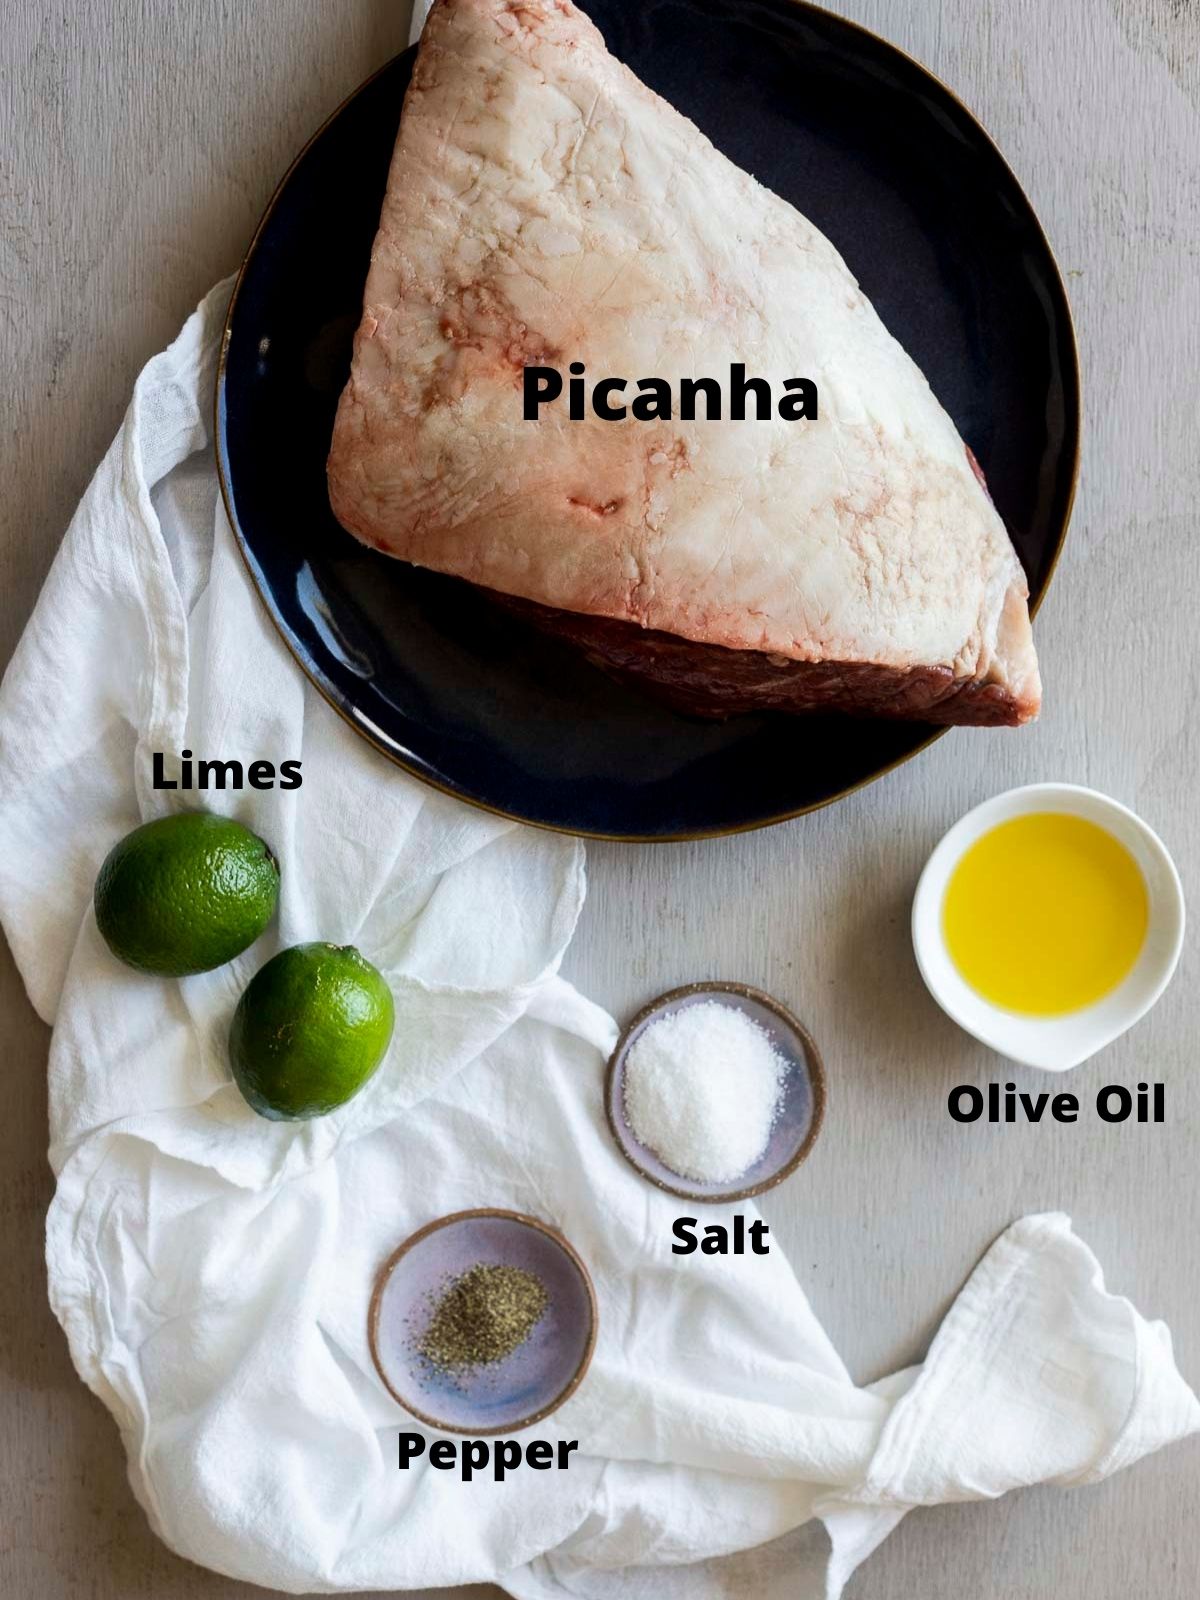 Overhead image of ingredients for picanha.